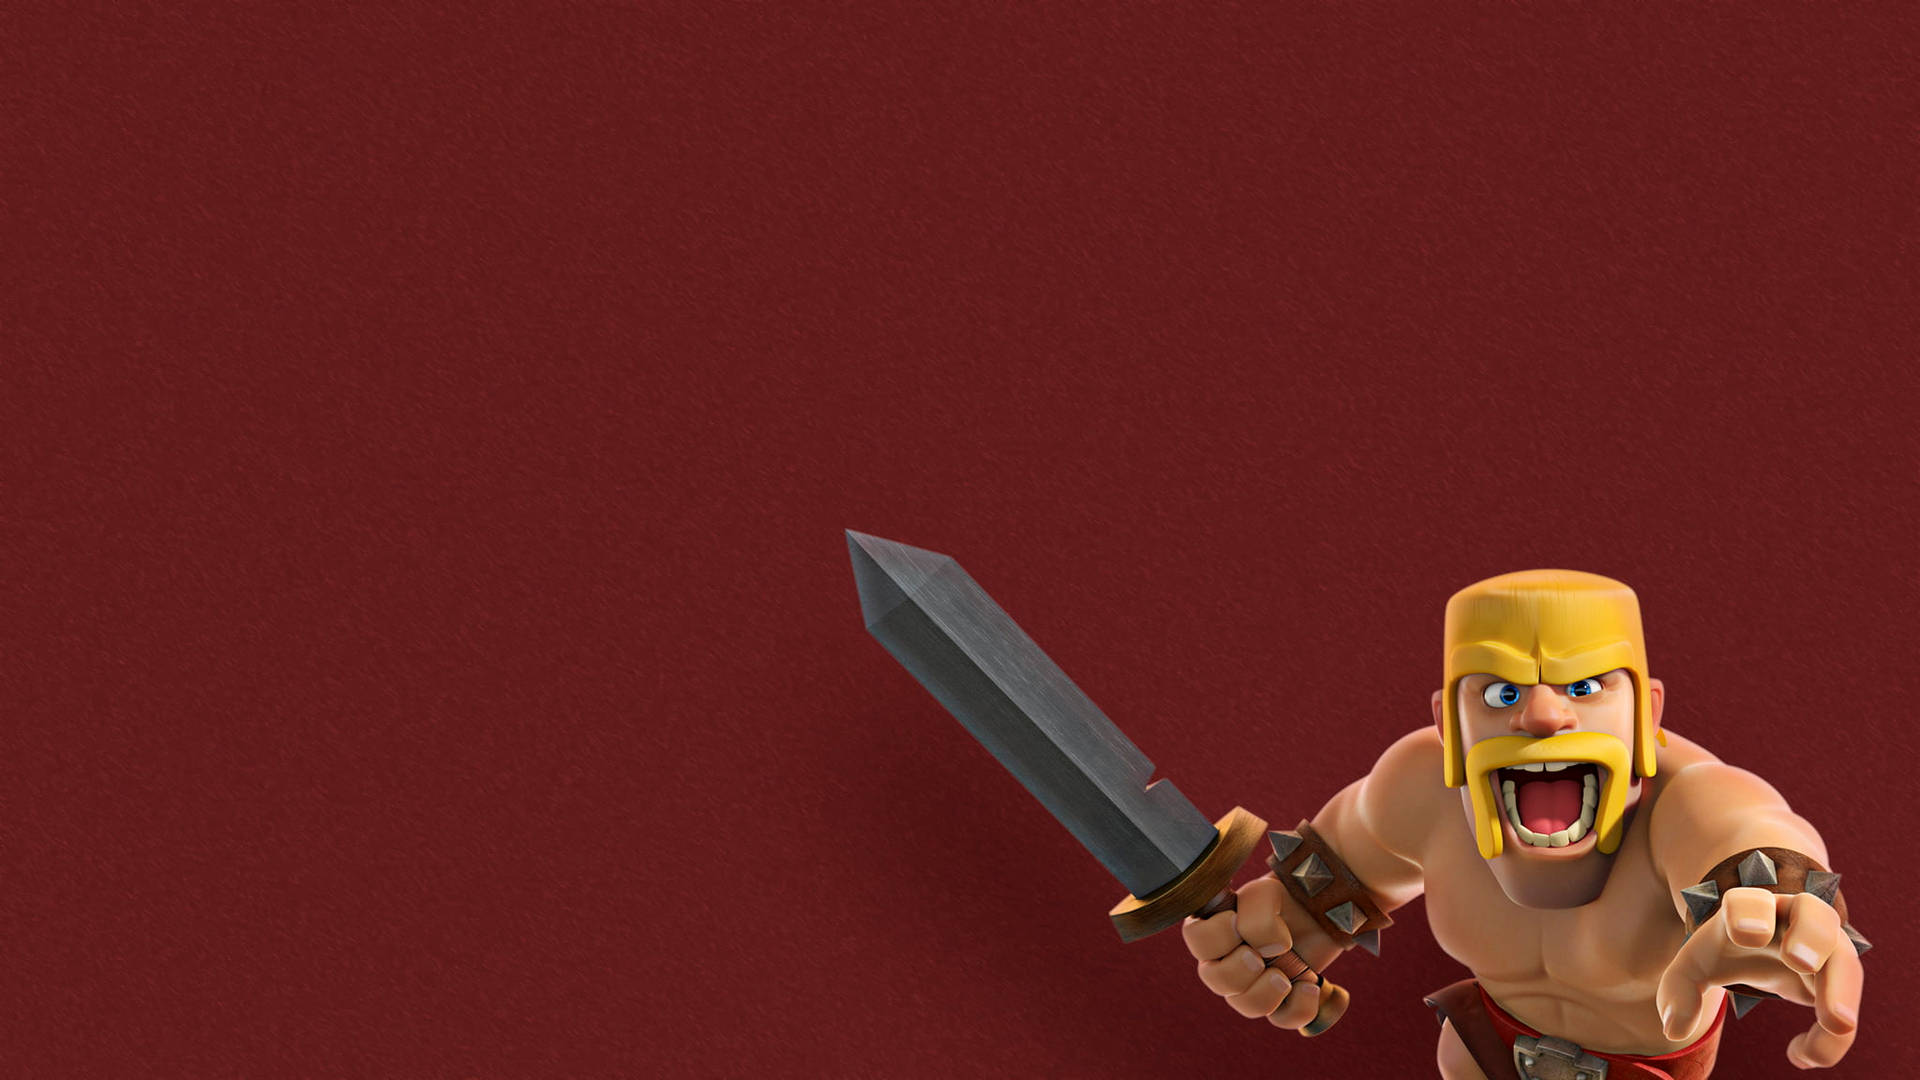 Barbarian With A Sword Clash Of Clans Wallpaper